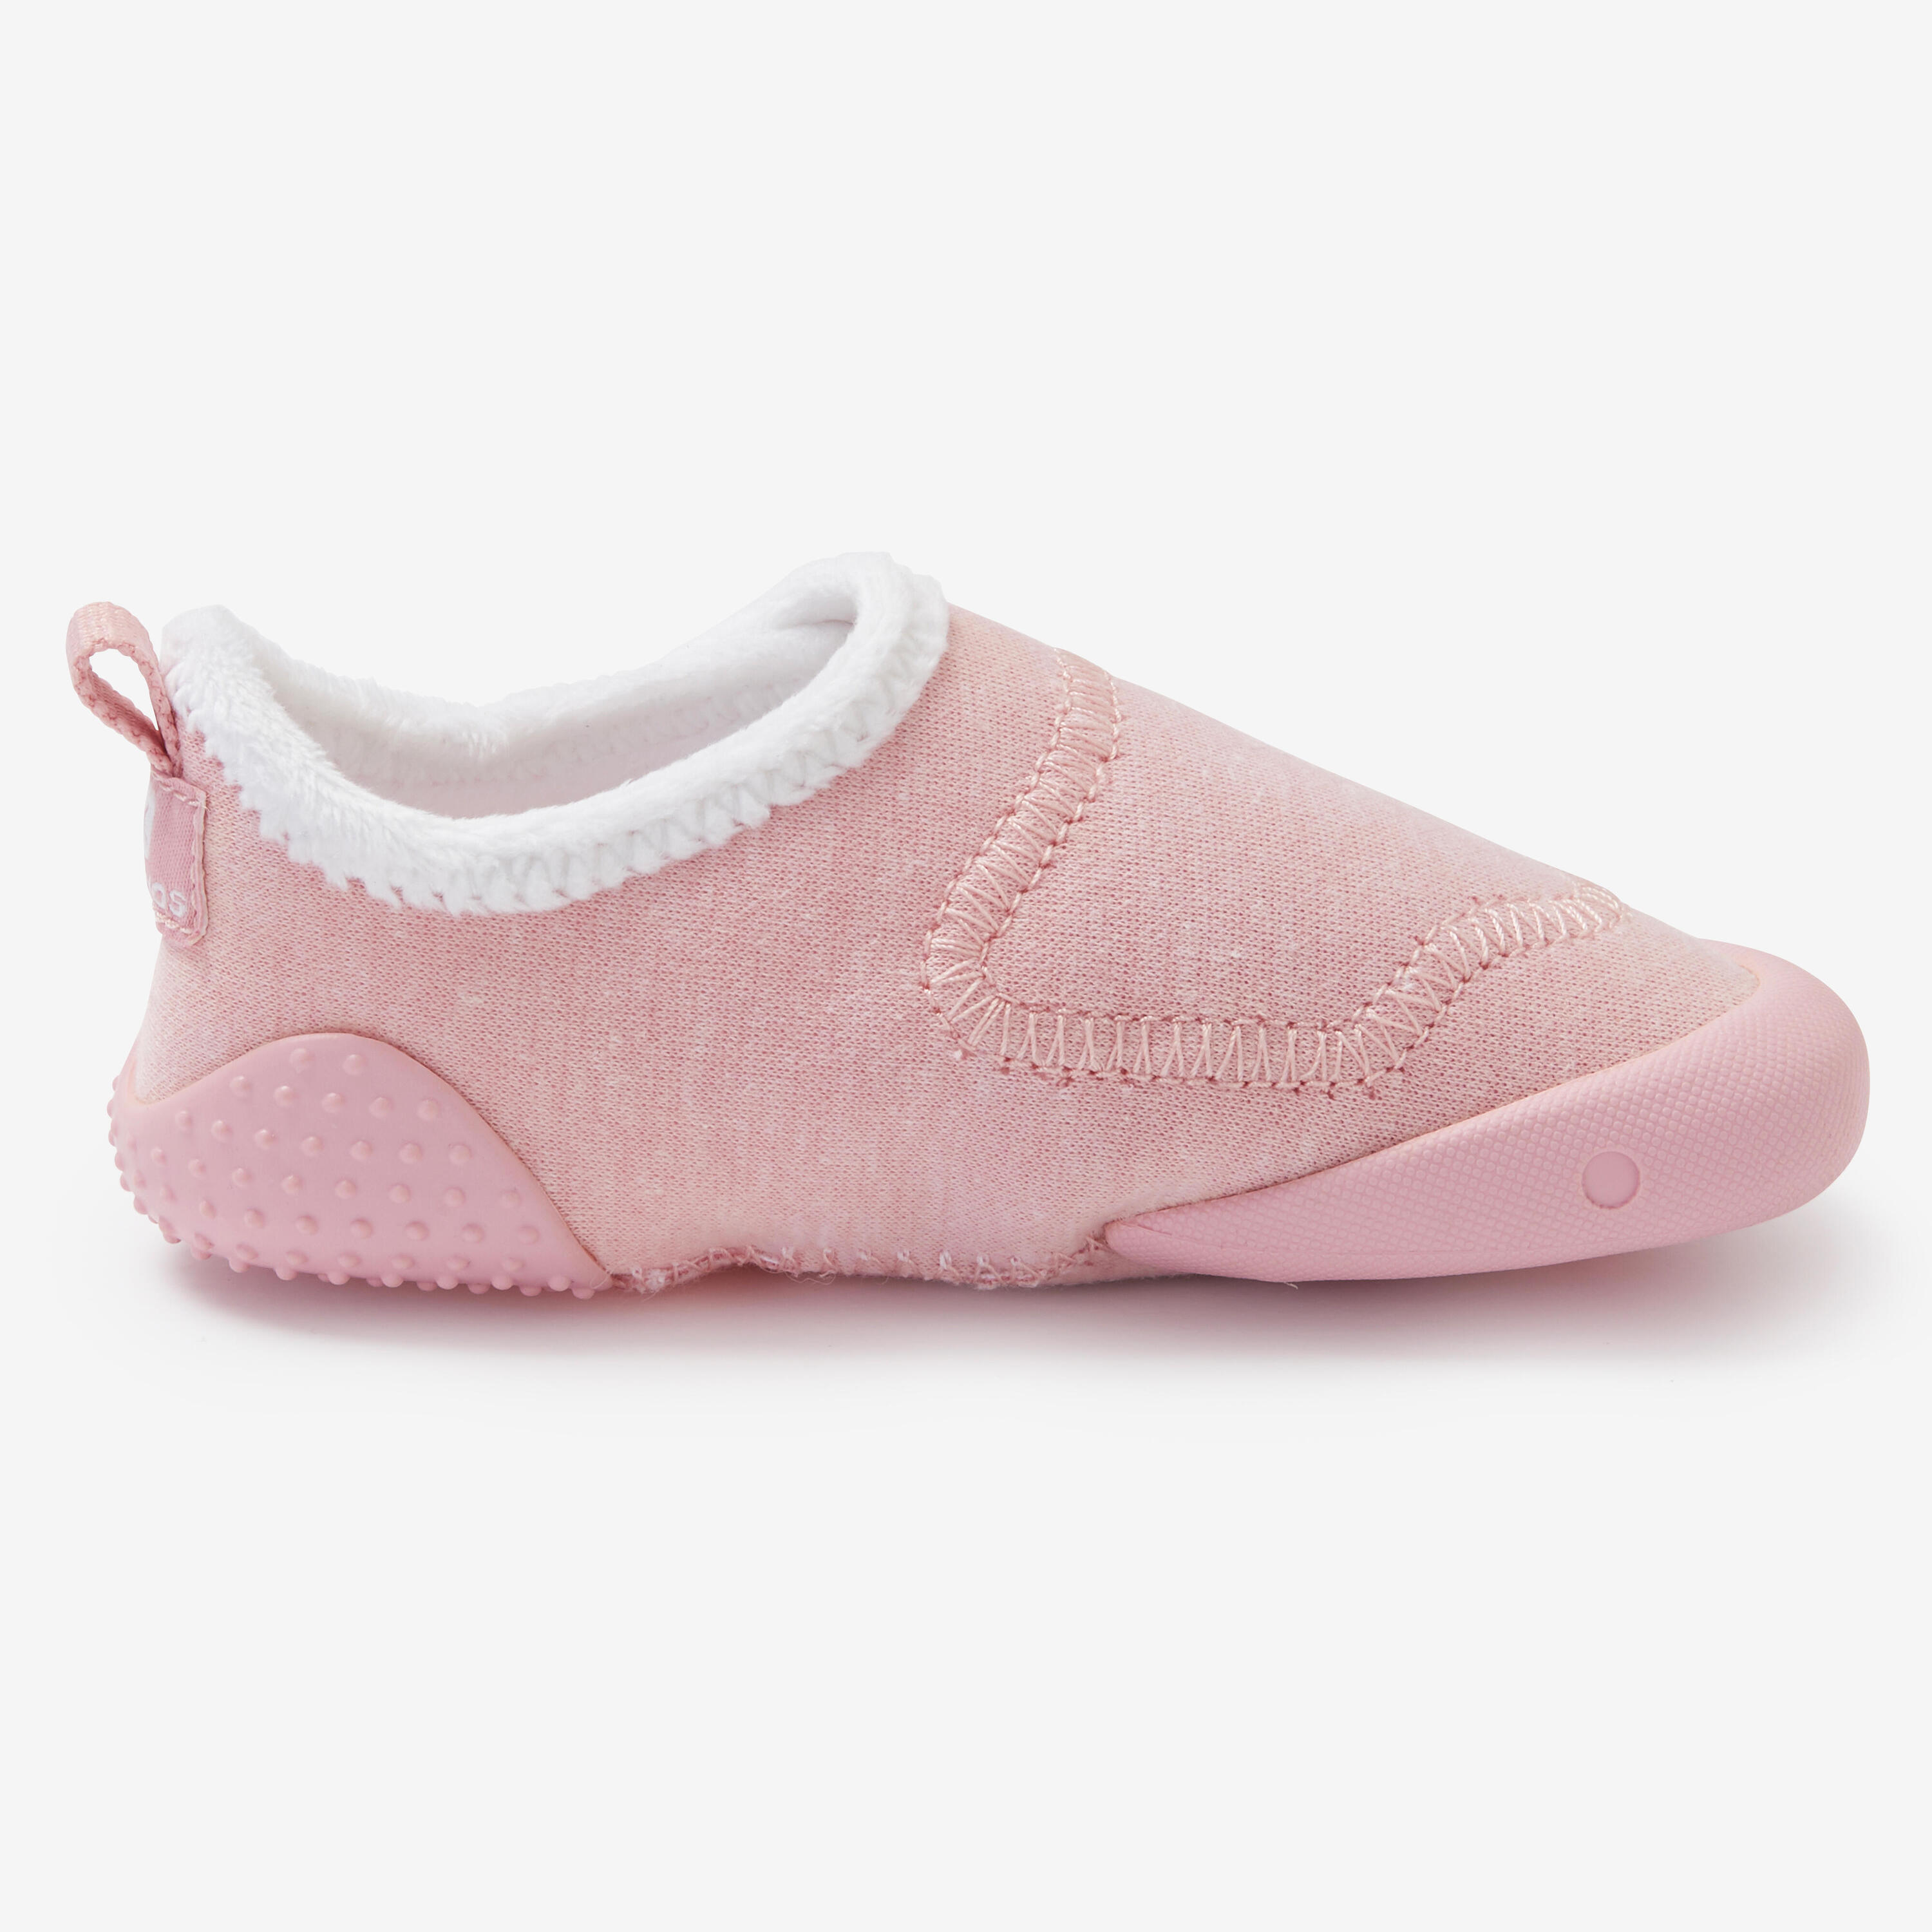 Kids' Comfortable Bootee 550 Babylight - Pink 2/7